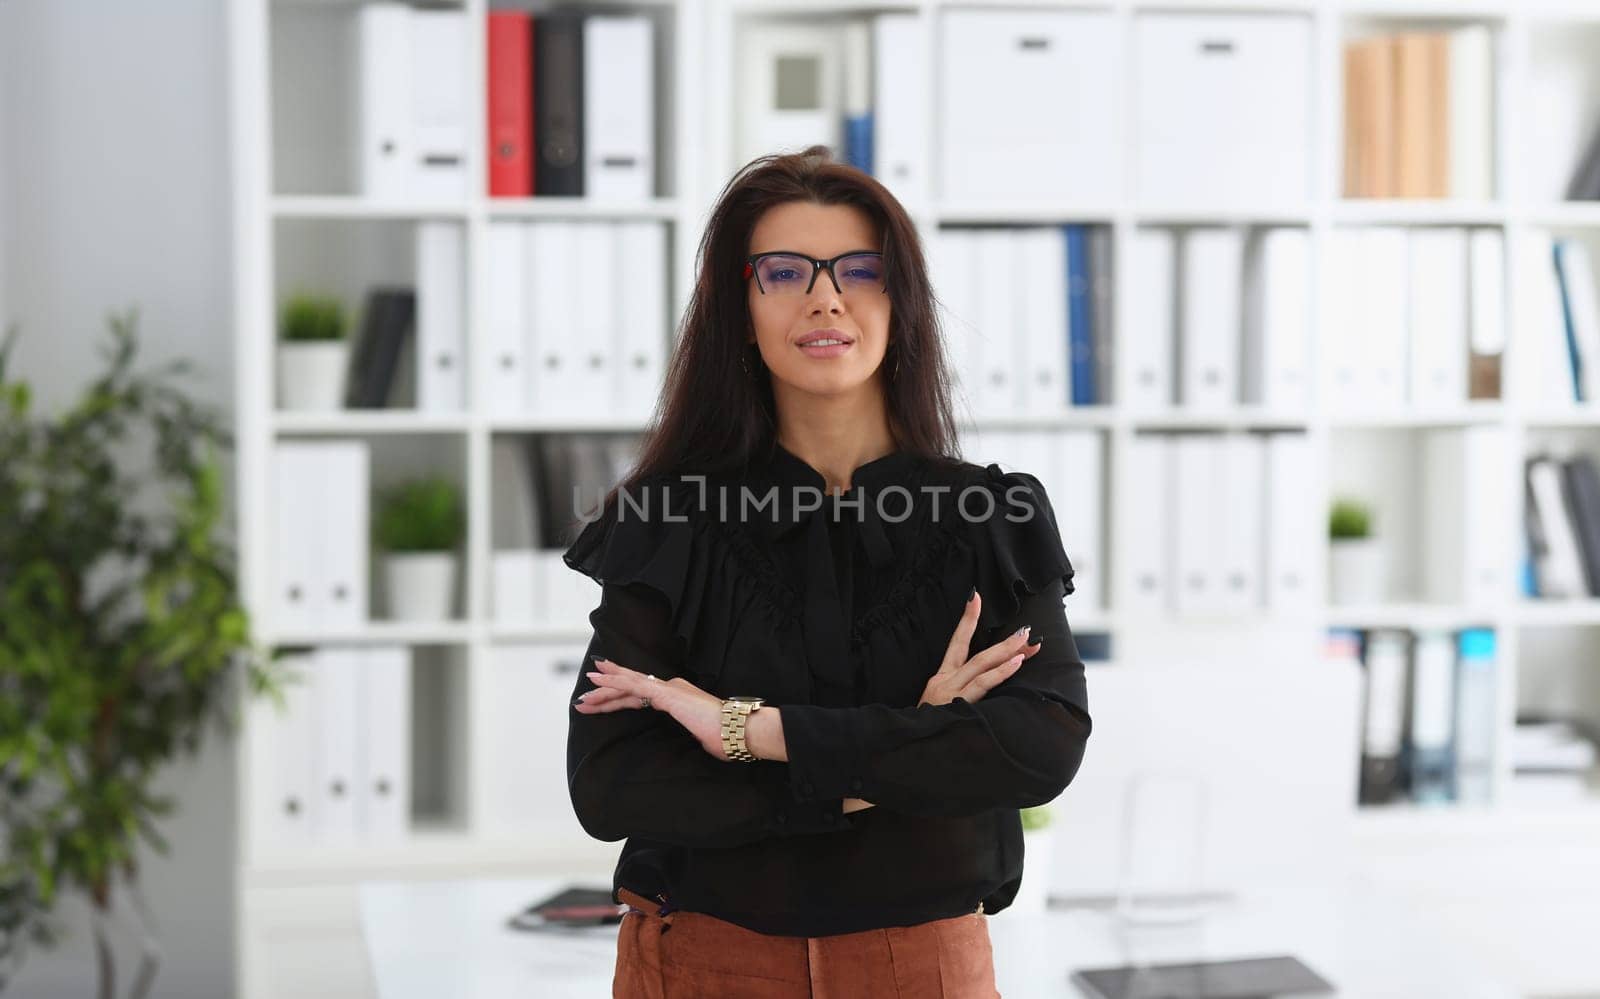 Beautiful smiling brunette woman in office posing arms crossed on chest wearing stylish glasses portrait. White collar worker at workspace officer highly pay smart serious job offer headhunter hr